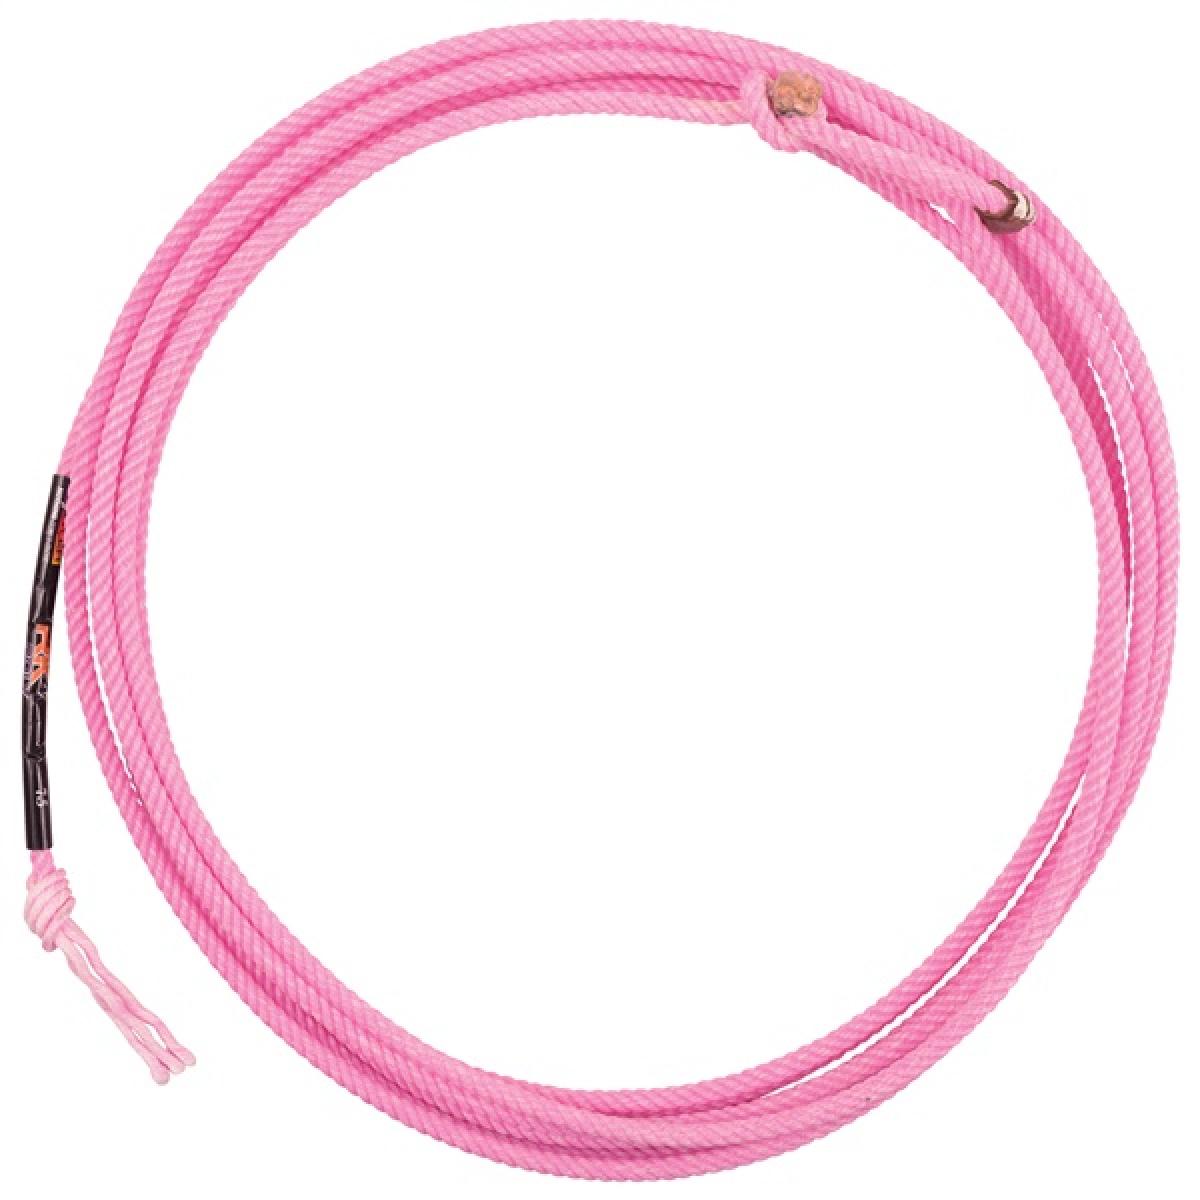 Equibrand Rattler Kids Rope Extreme 4 Strand Poly Pink